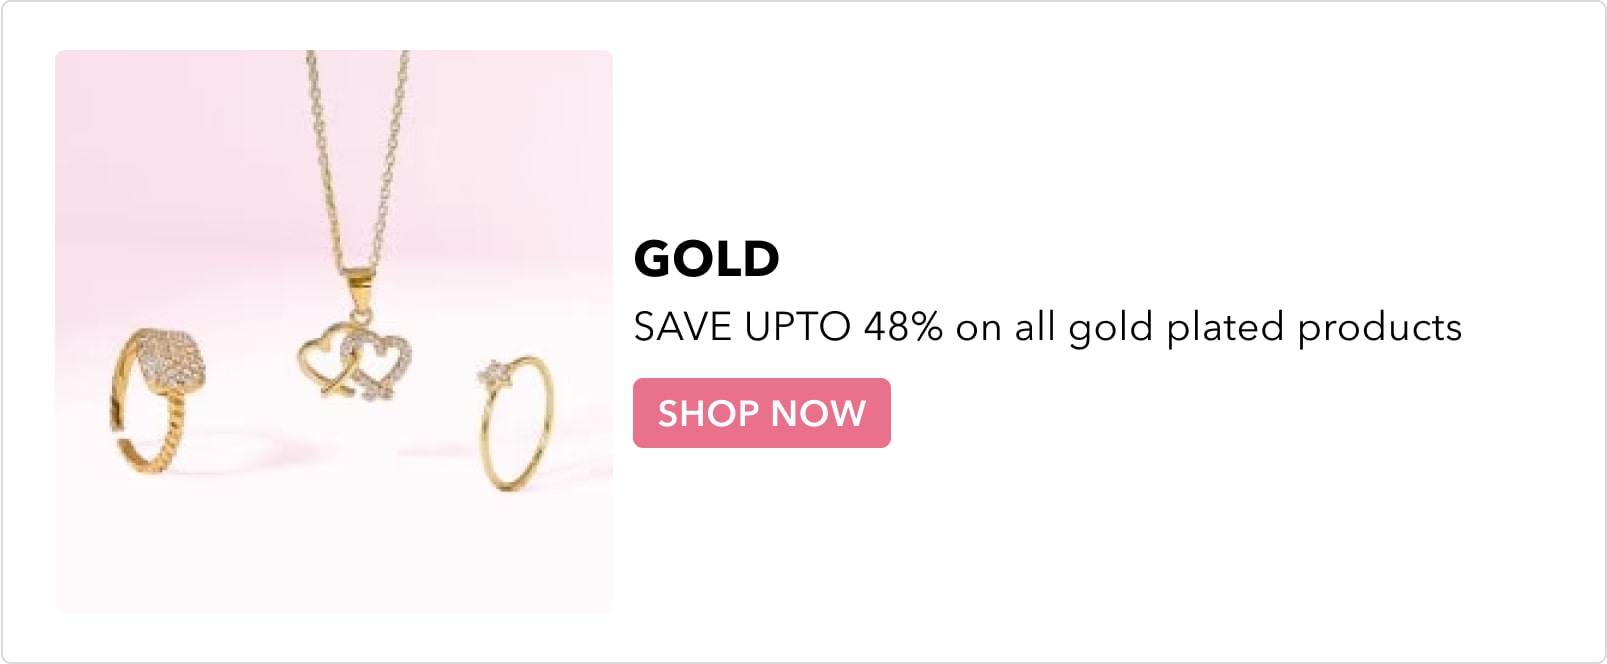 SAVE UPTO 48% on all gold plated products